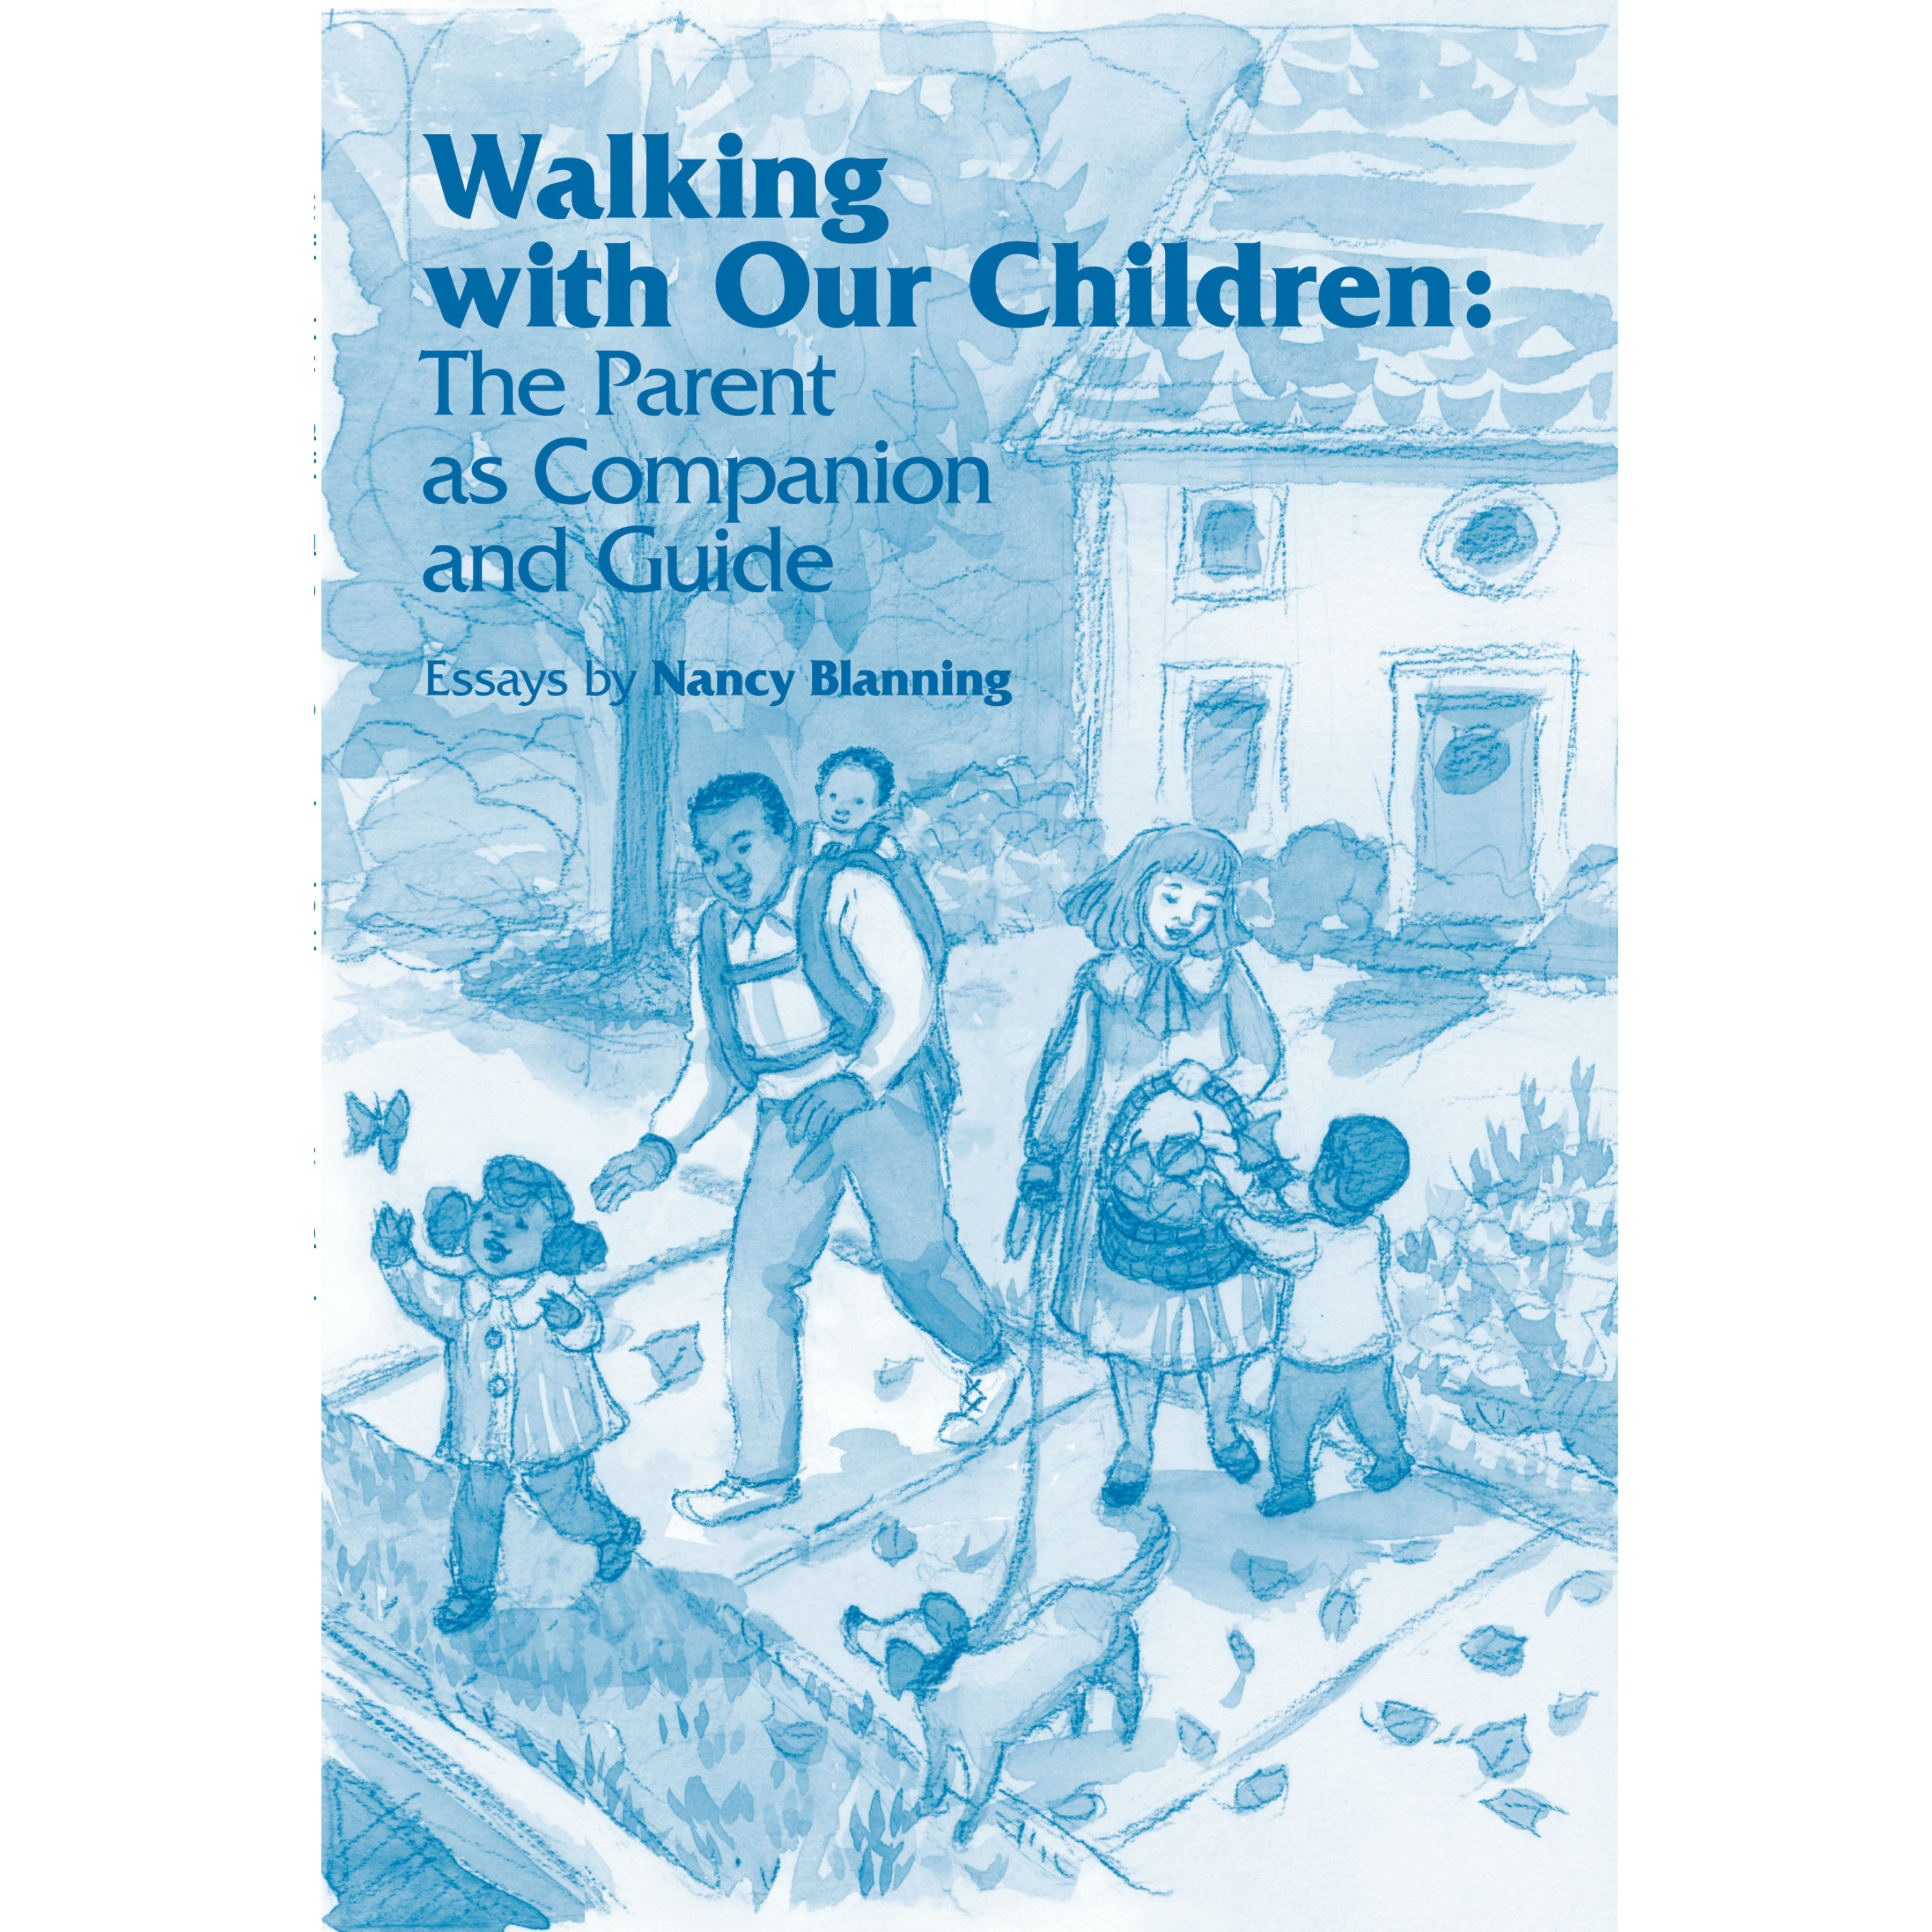 Walking with Our Children: The Parent as Companion and Guide